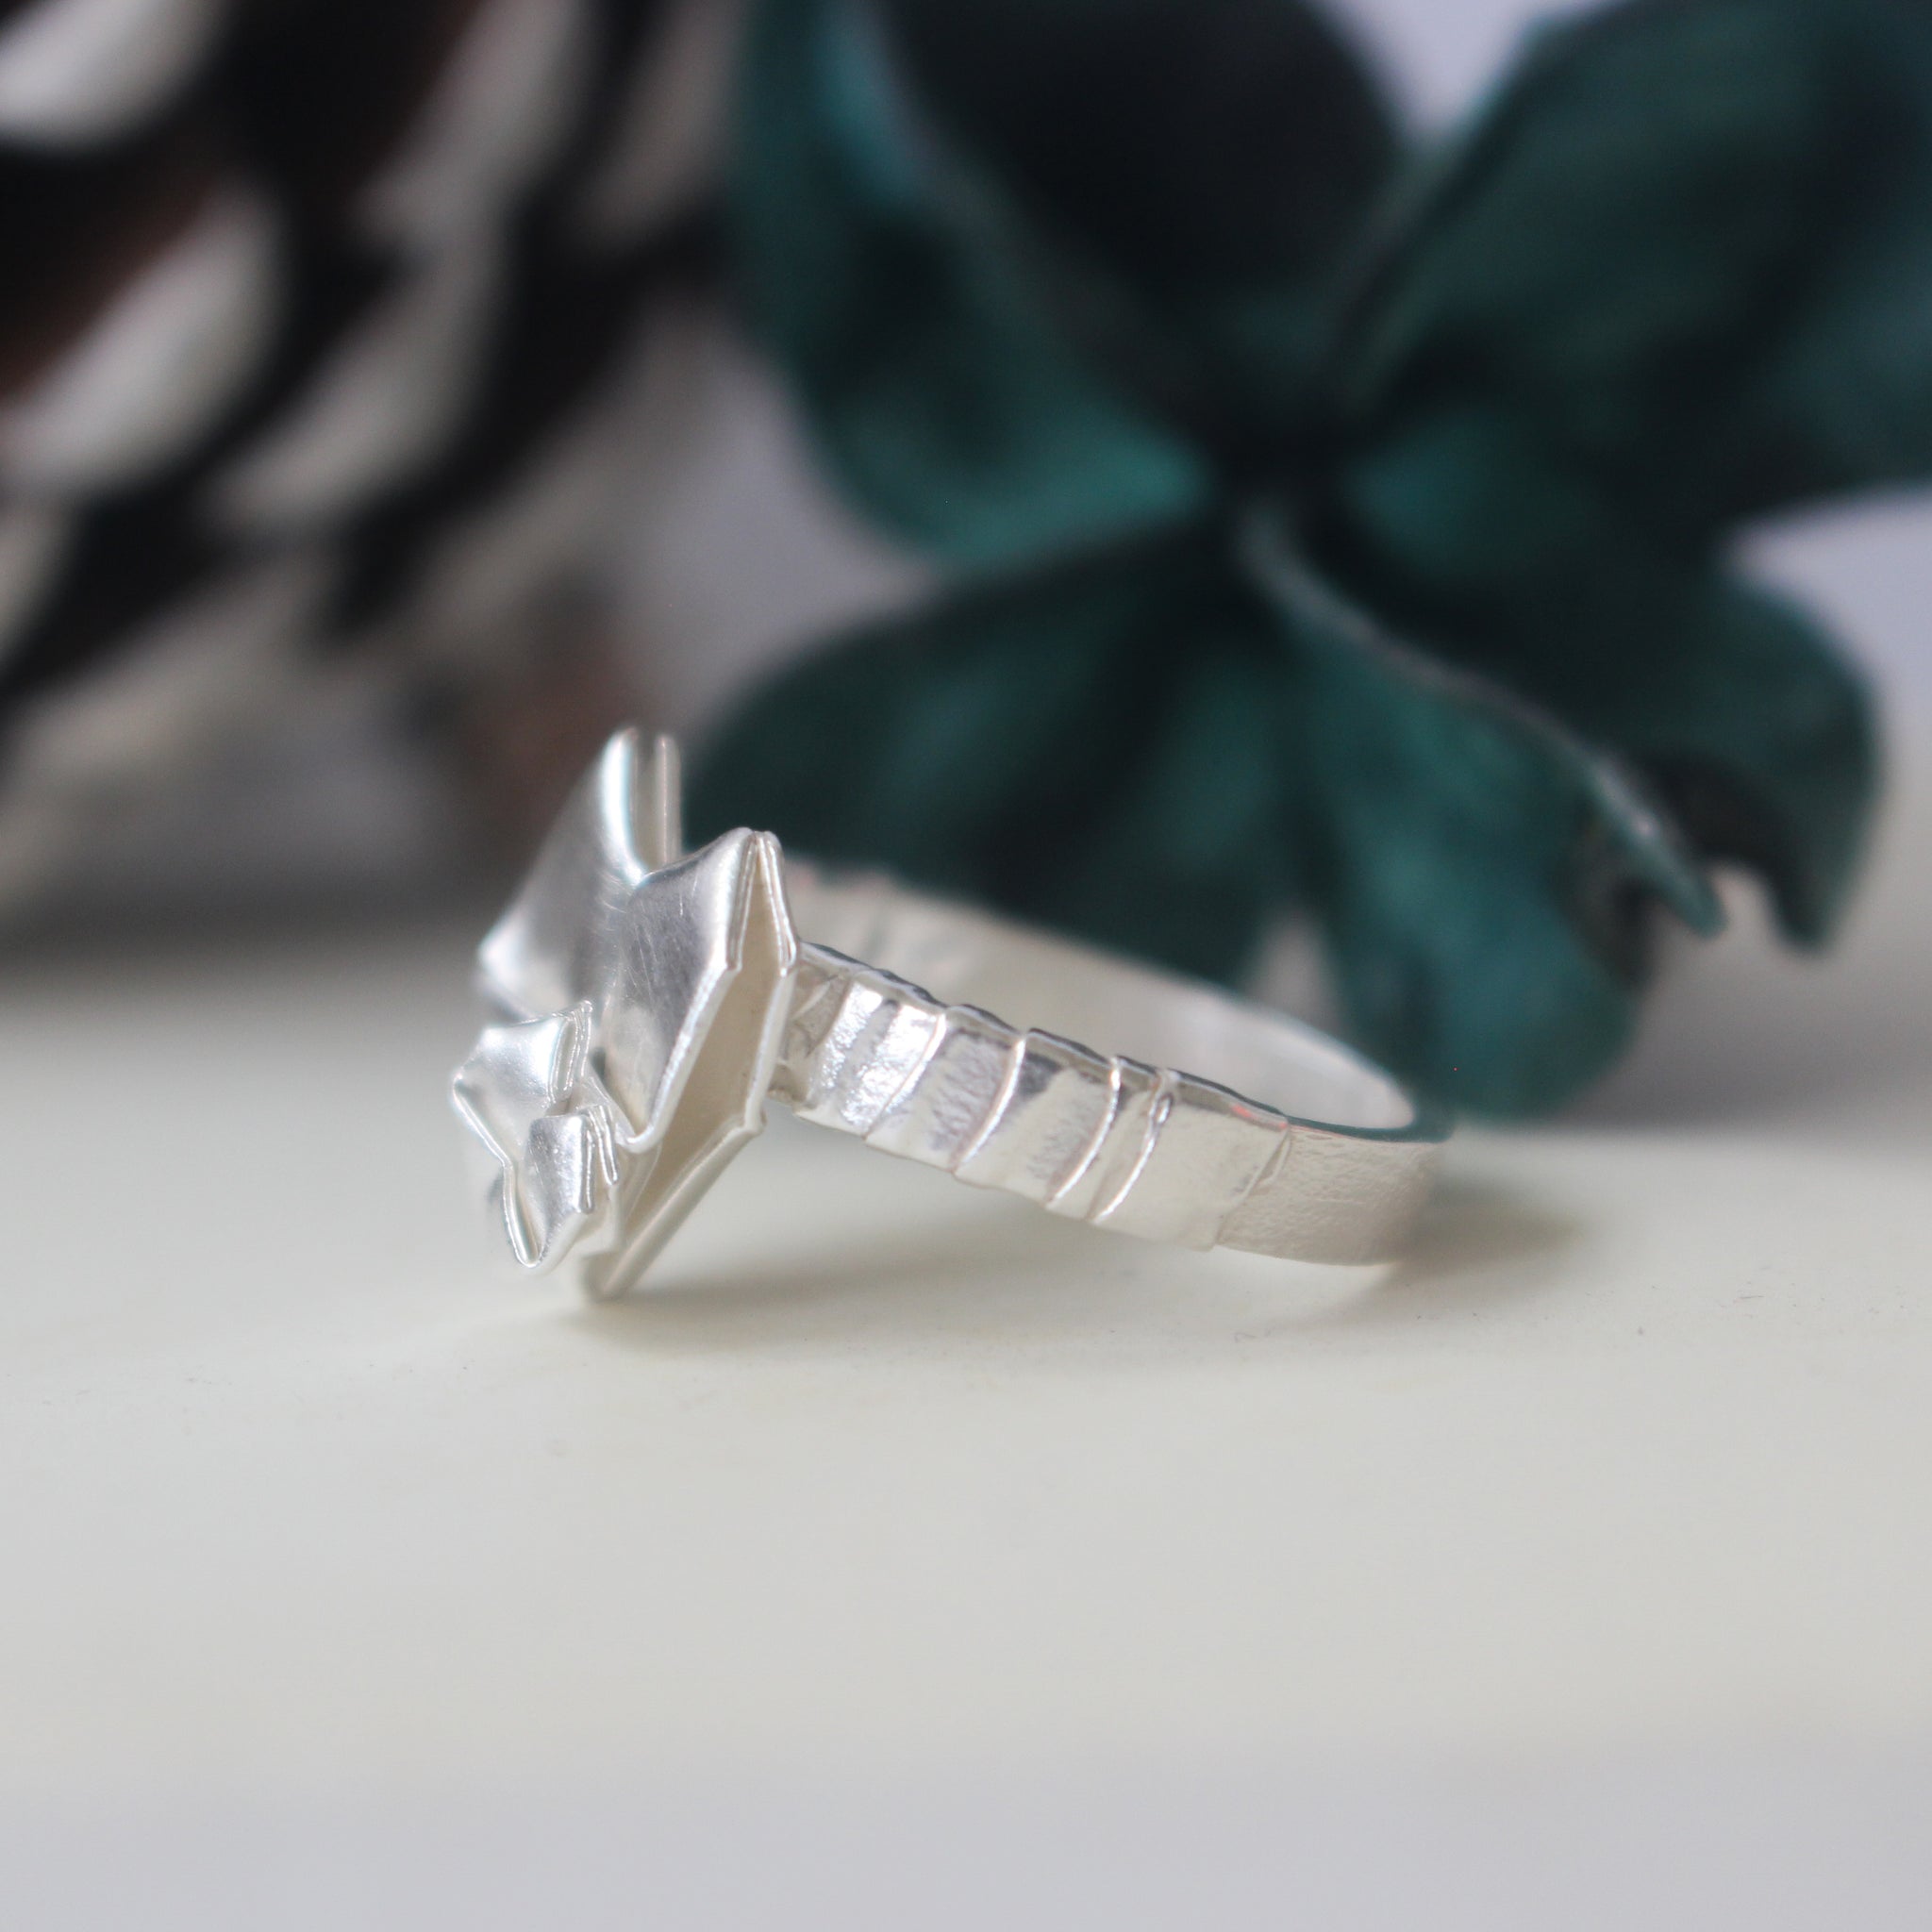 Ring E 925 Silver Origami Big and Small Heart Ring Size 11